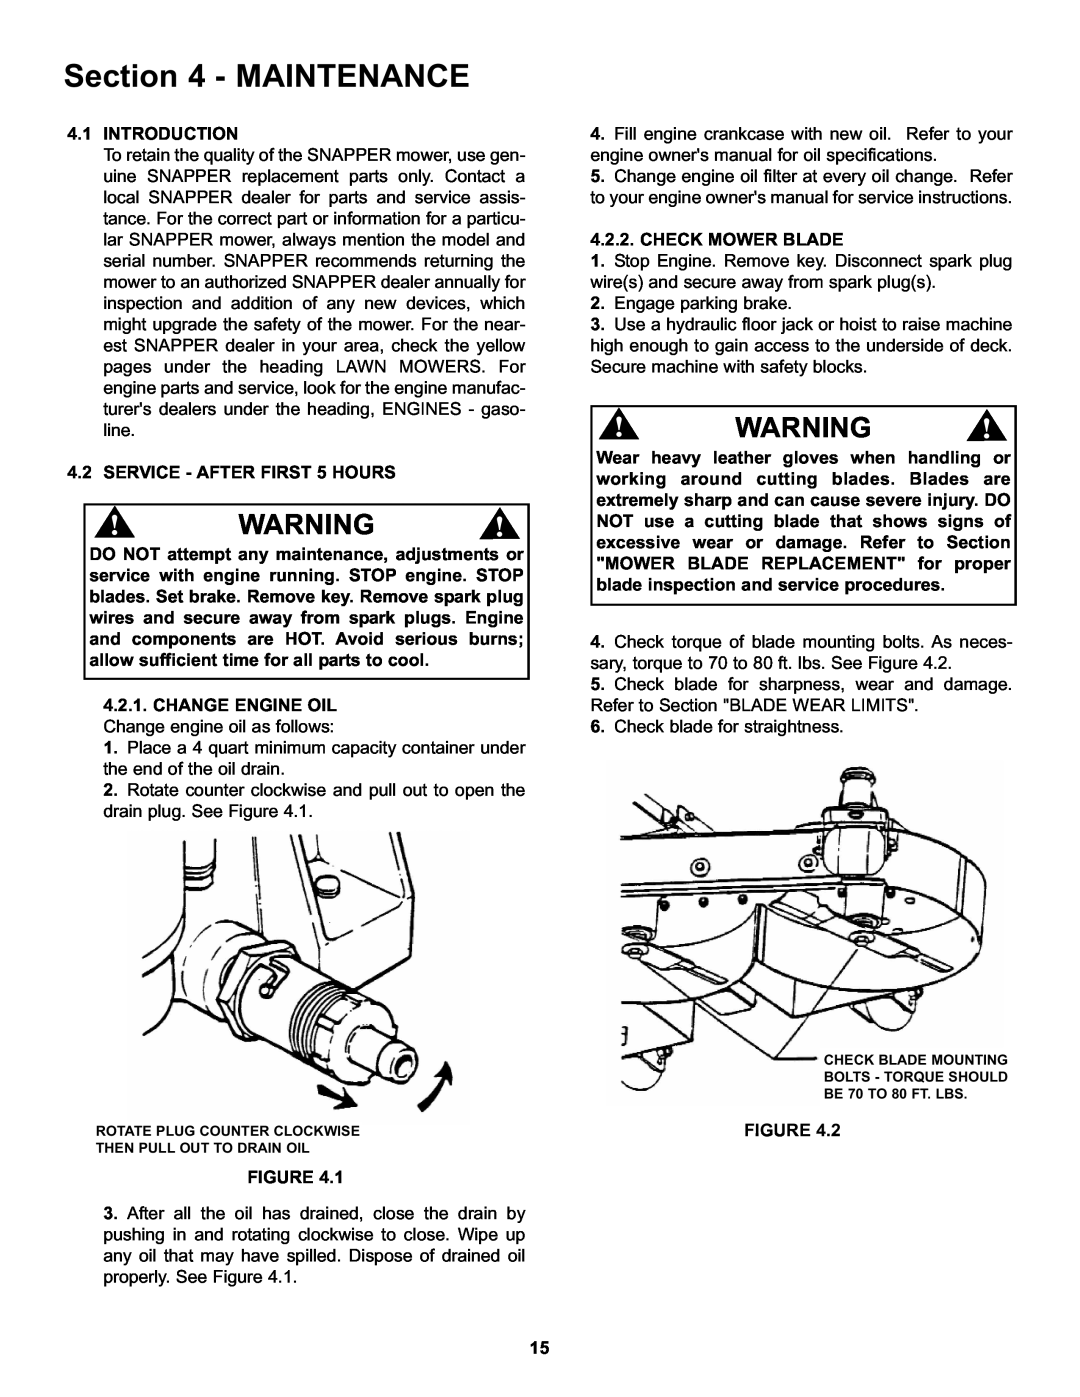 Snapper CZT19481KWV Maintenanceoperating Instructions, Introduction, SERVICE - AFTER FIRST 5 HOURS, Check Mower Blade 